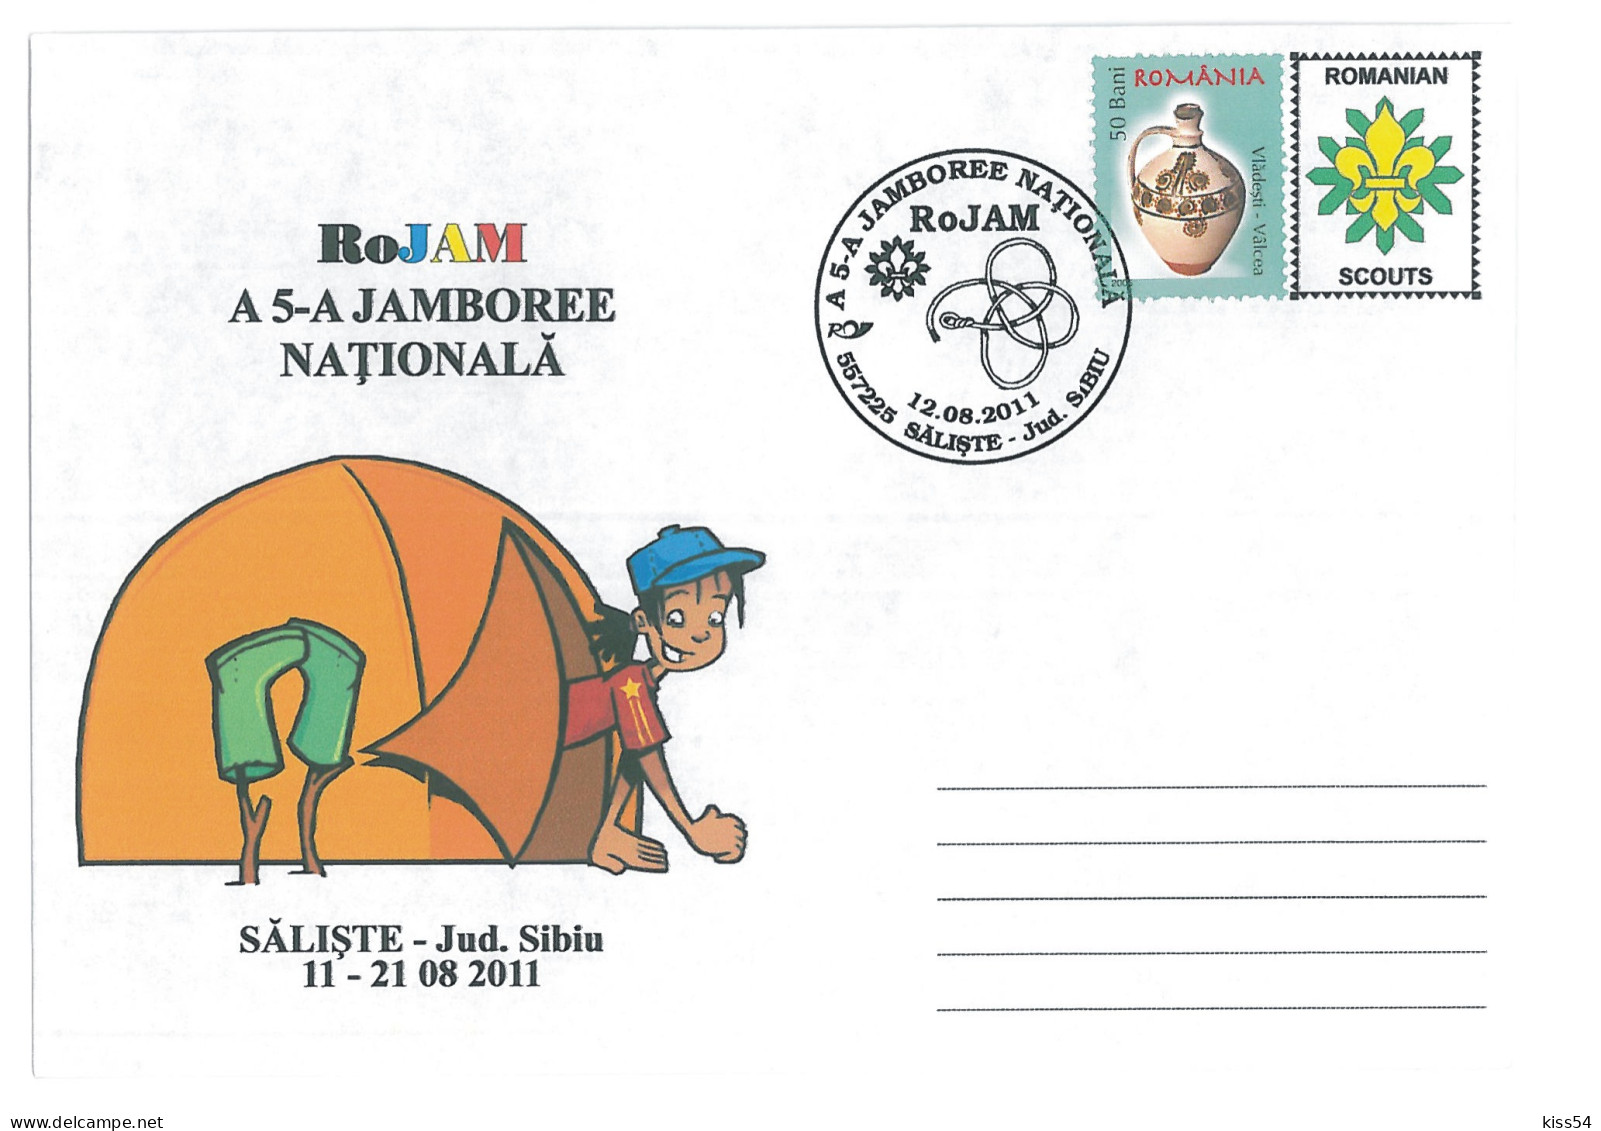 SC 47 - 1302 ROMANIA, National JAMBOREE, Scout - Cover - Used - 2011 - Covers & Documents